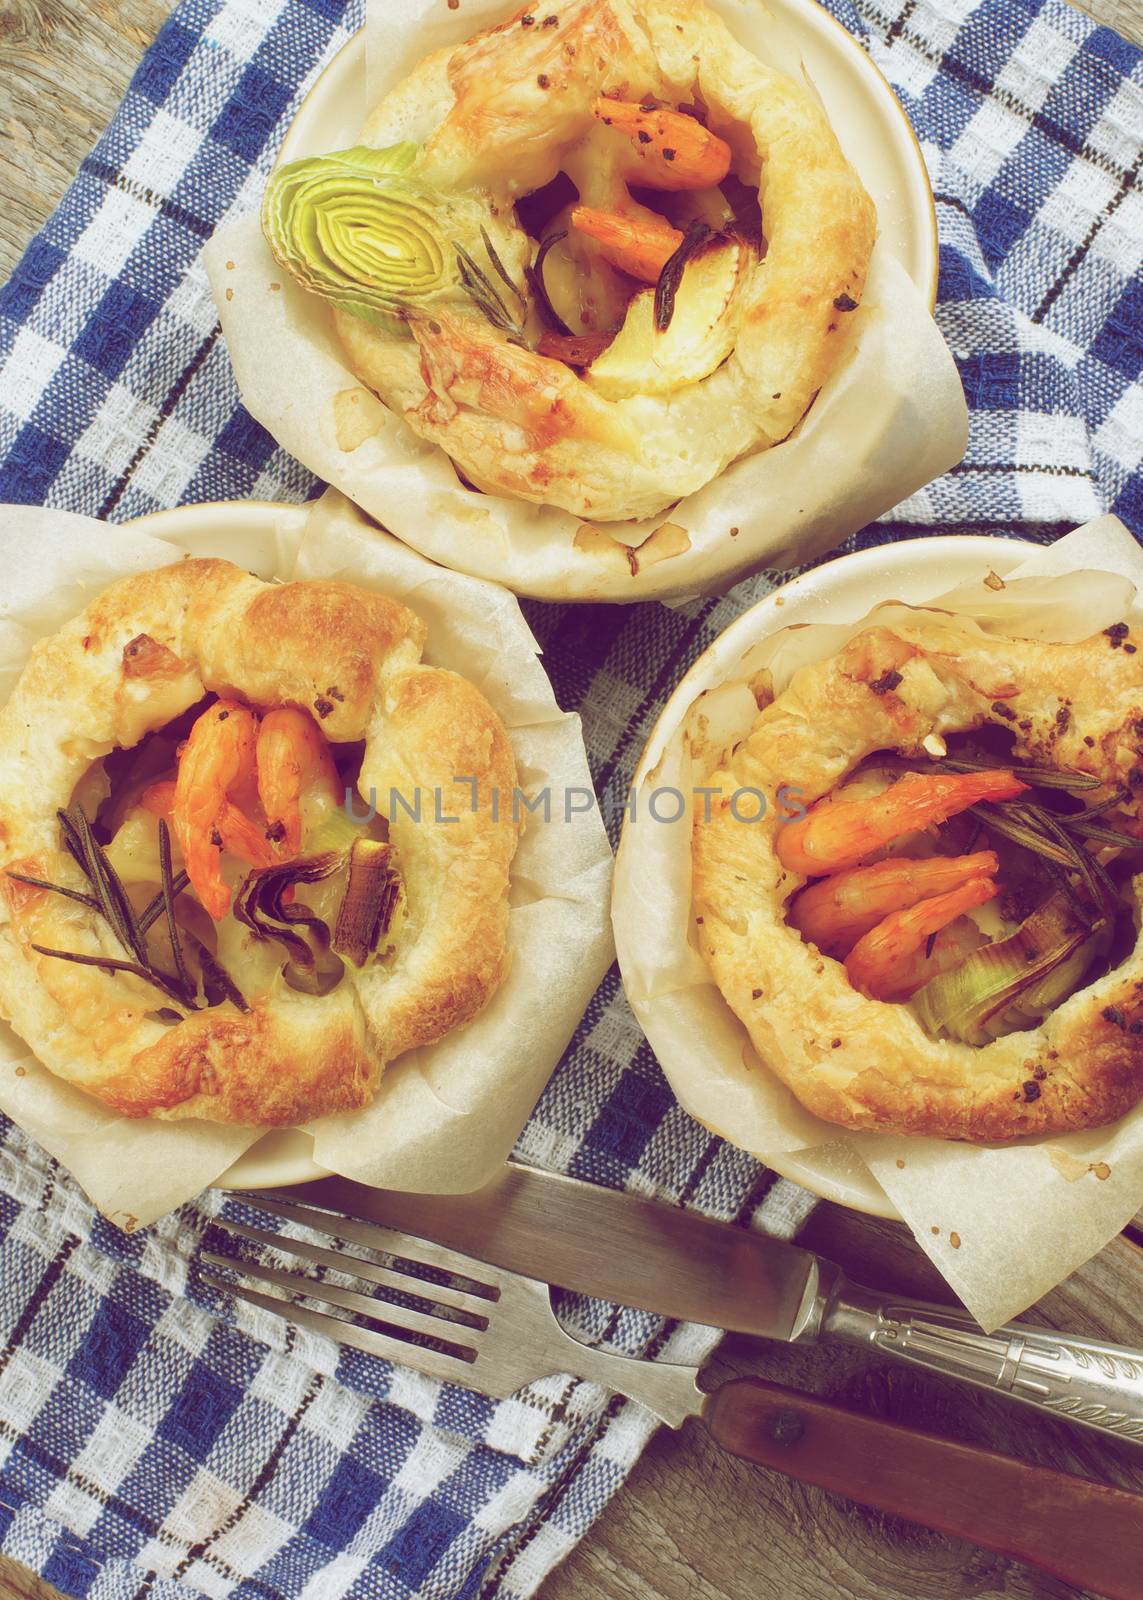 Delicious Puff Pastry Snacks with Shrimps, Leek and Cheese Oven-Baked in Ramekin with Fork and Knife on Checkered Napkin. Retro Styled